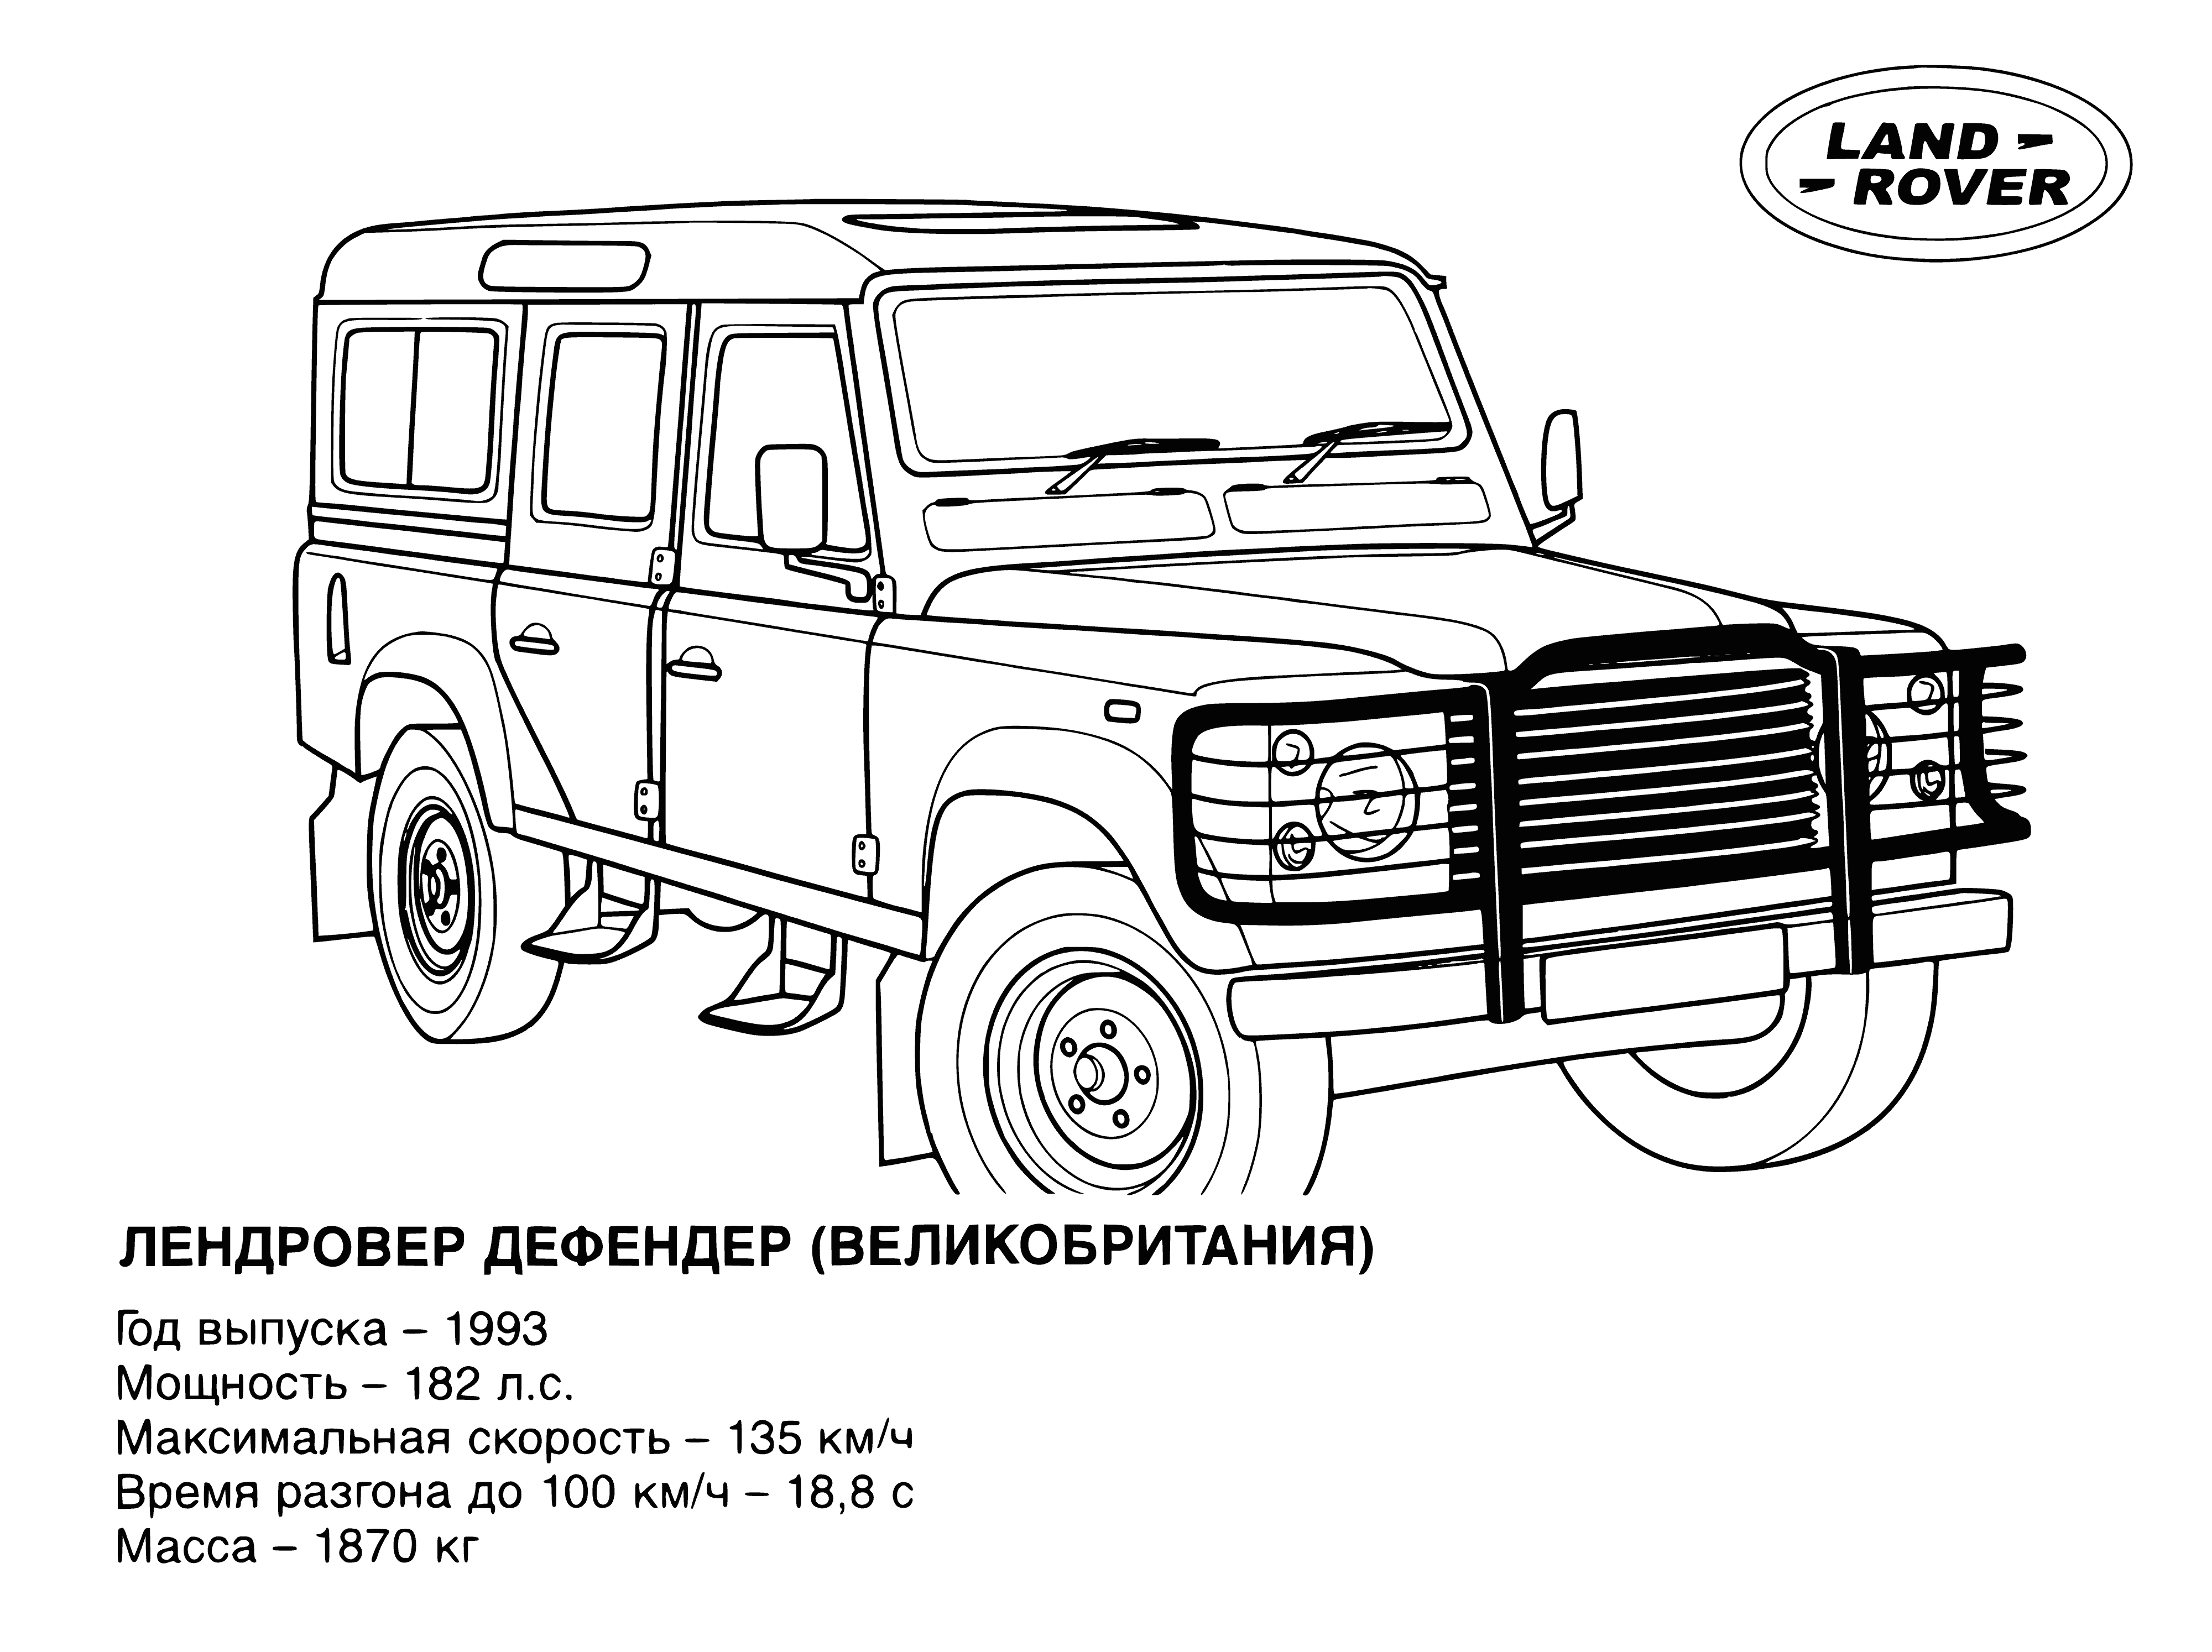 coloring page: UK Jeep is a small SUV based on Fiat Panda 4x4, with body-on-frame construction and 4-wheel drive. 2 engine types: 1.2L petrol or 1.3L diesel.